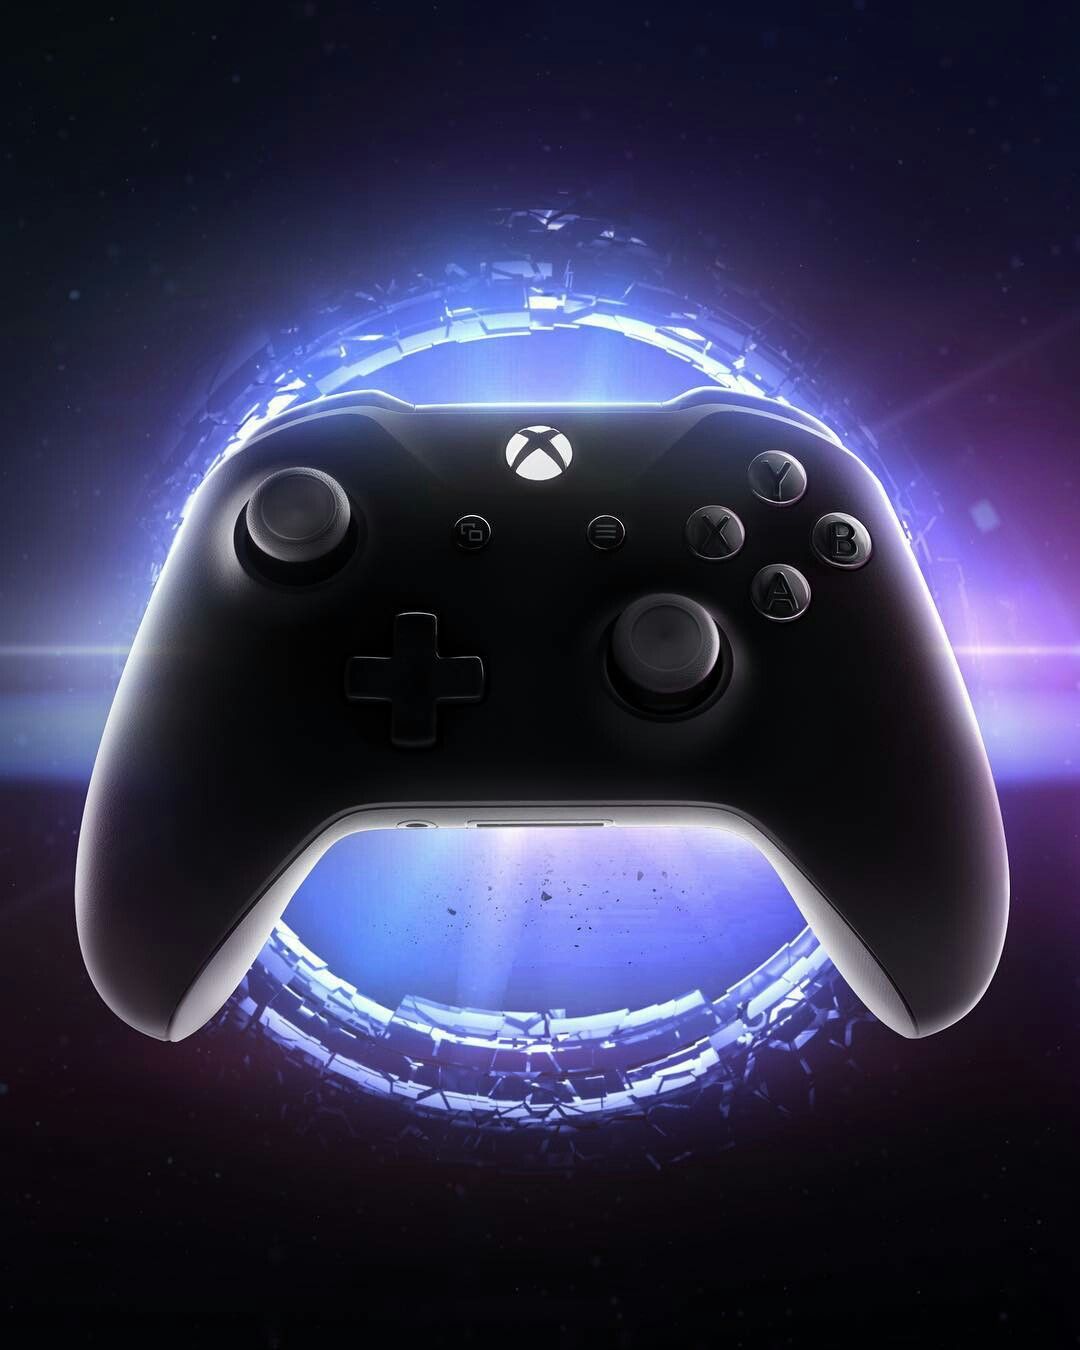 Xbox One Controller Wallpaper. Xbox, Ps games, Geek games